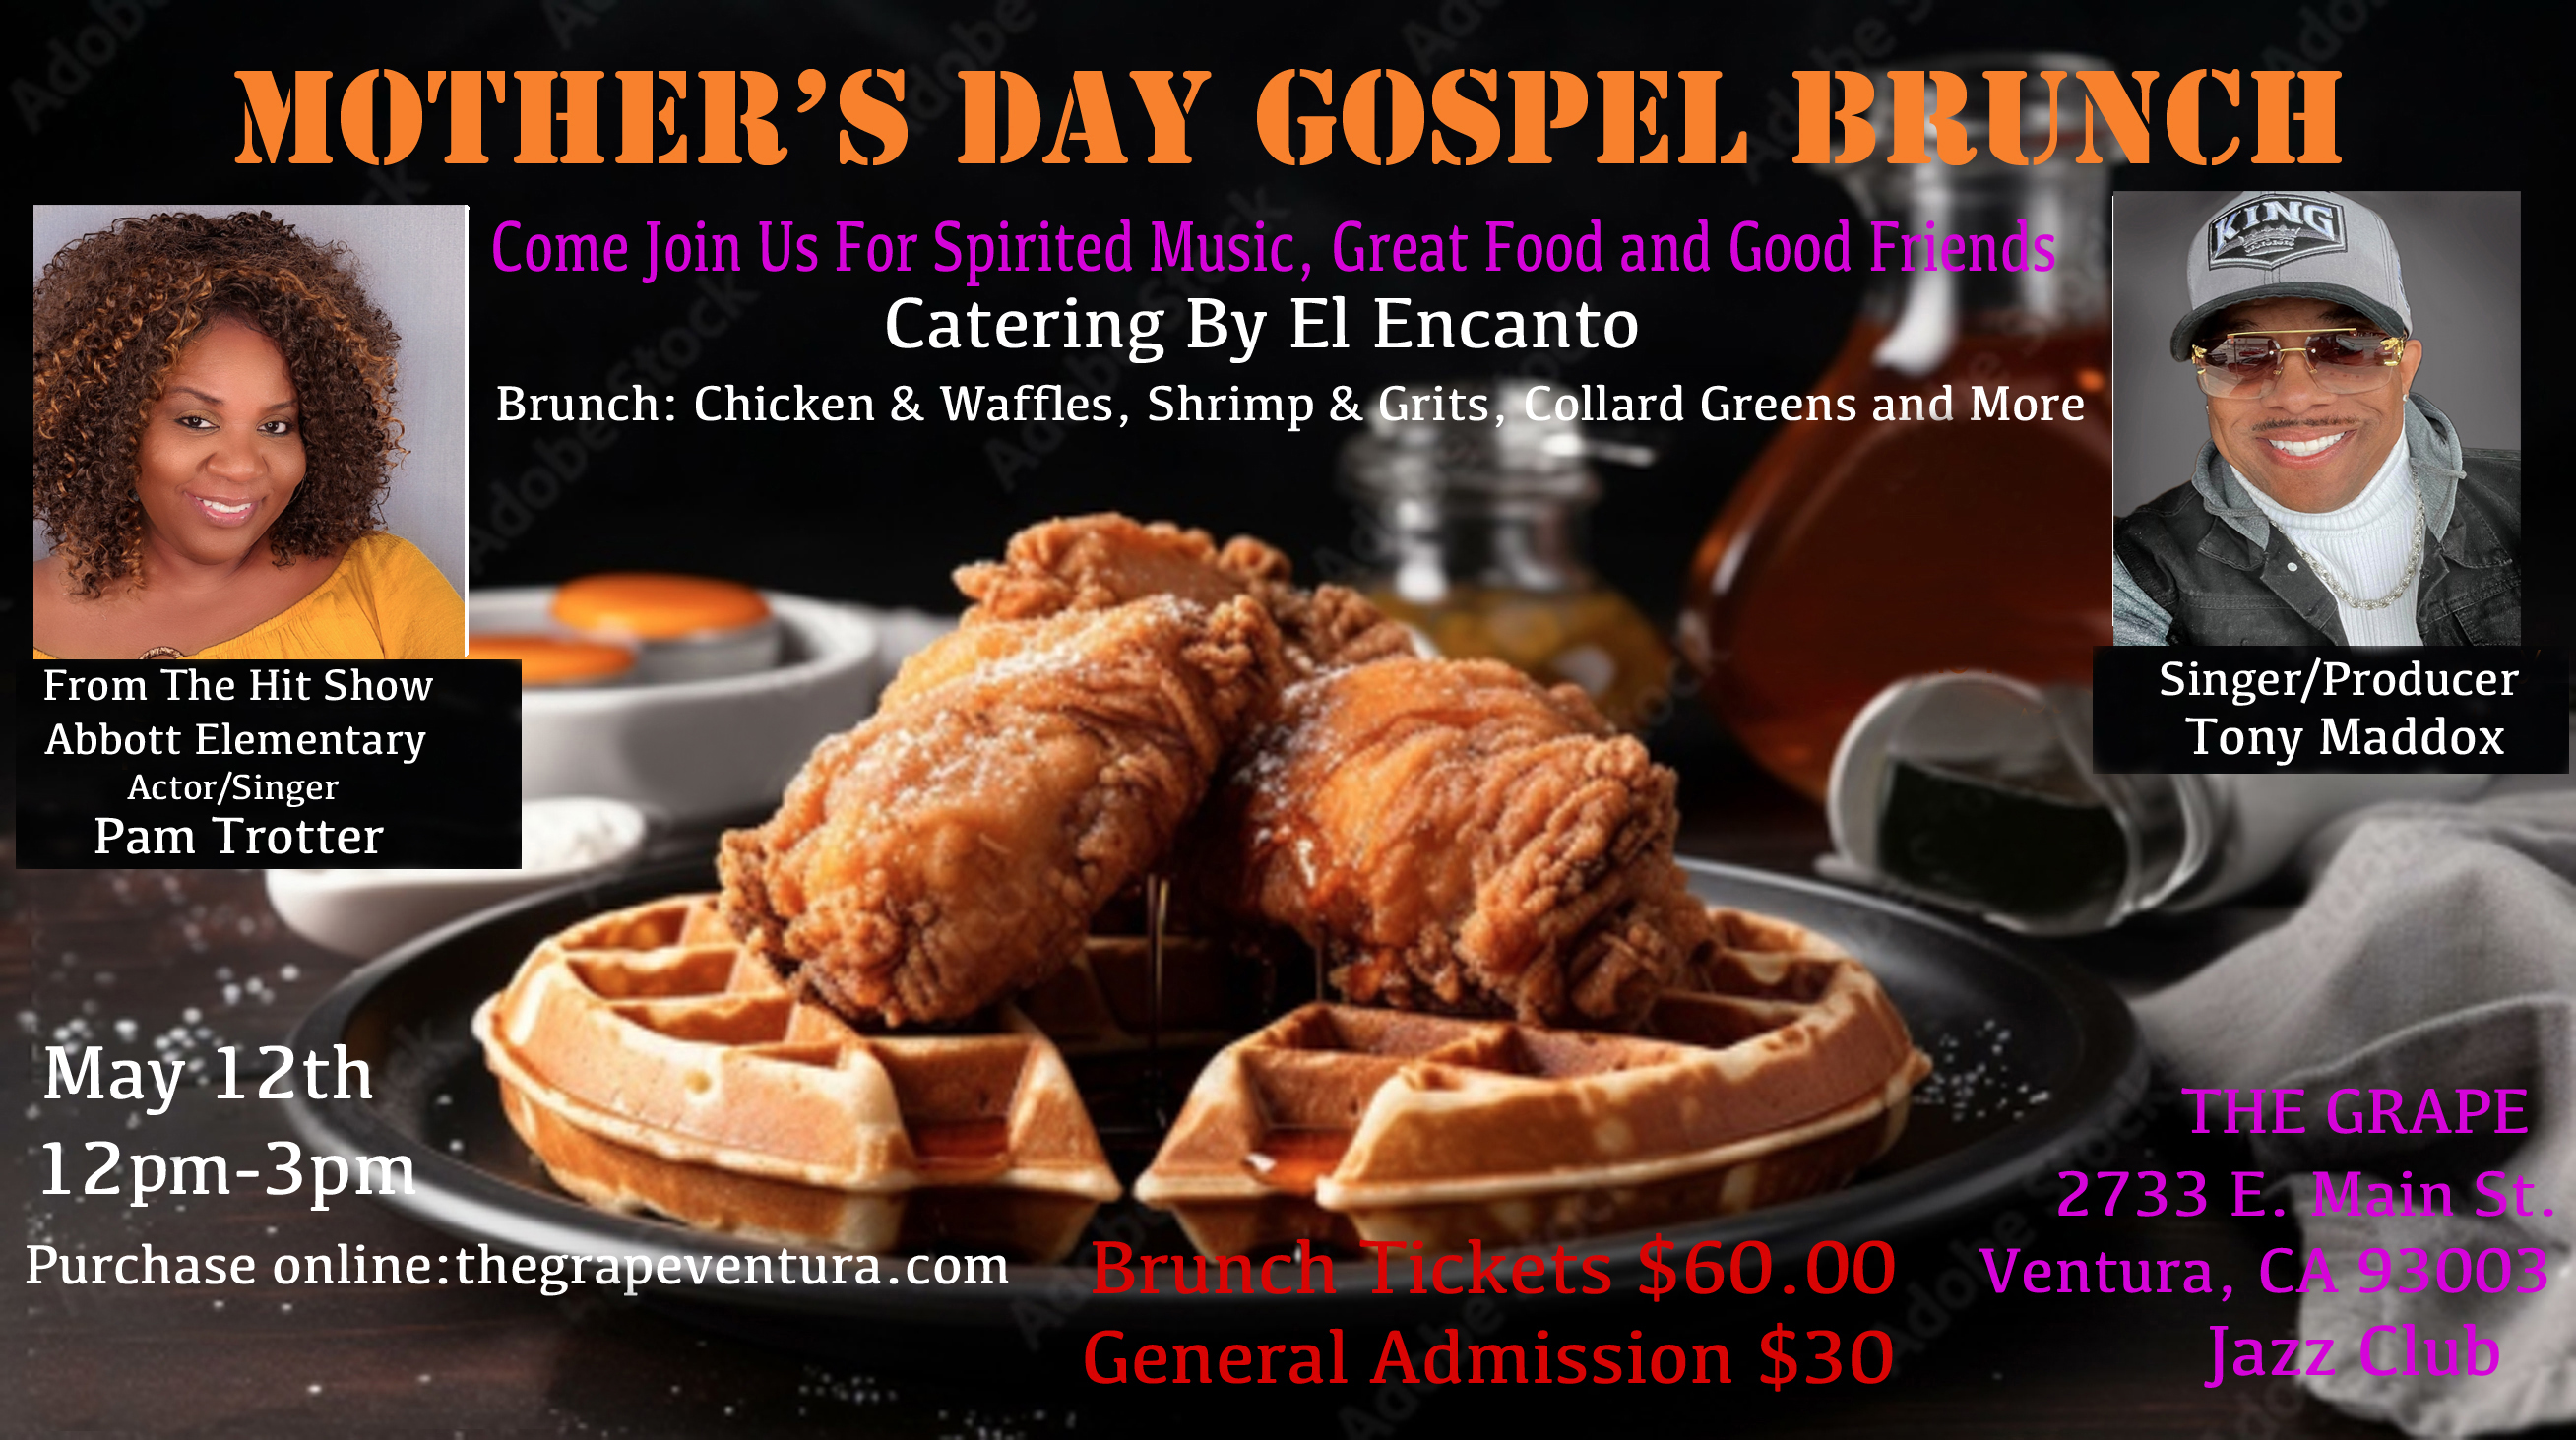 Mother's Day Gospel Brunch with Tony Maddox